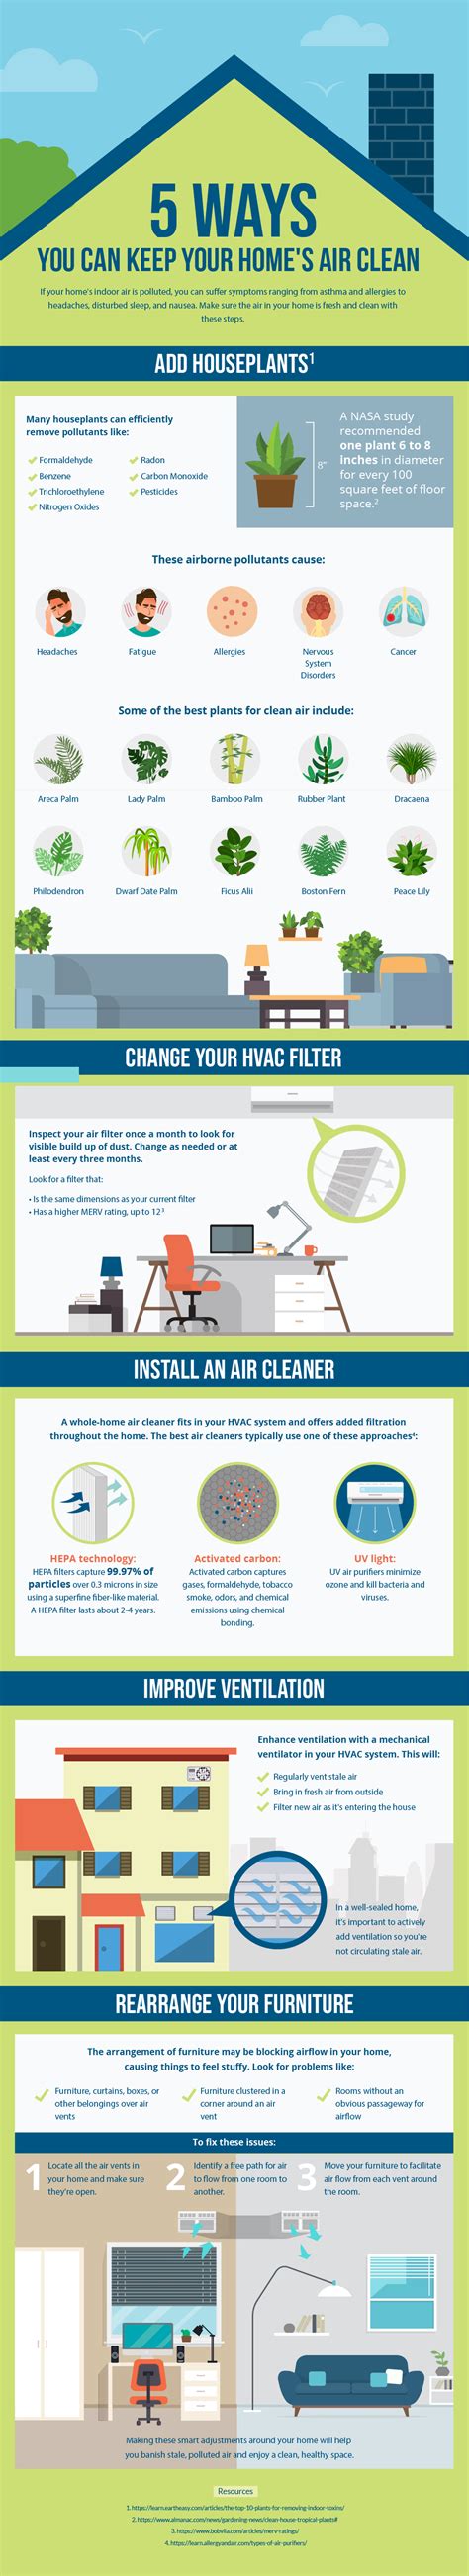 5 Ways You Can Keep Your Homes Air Clean